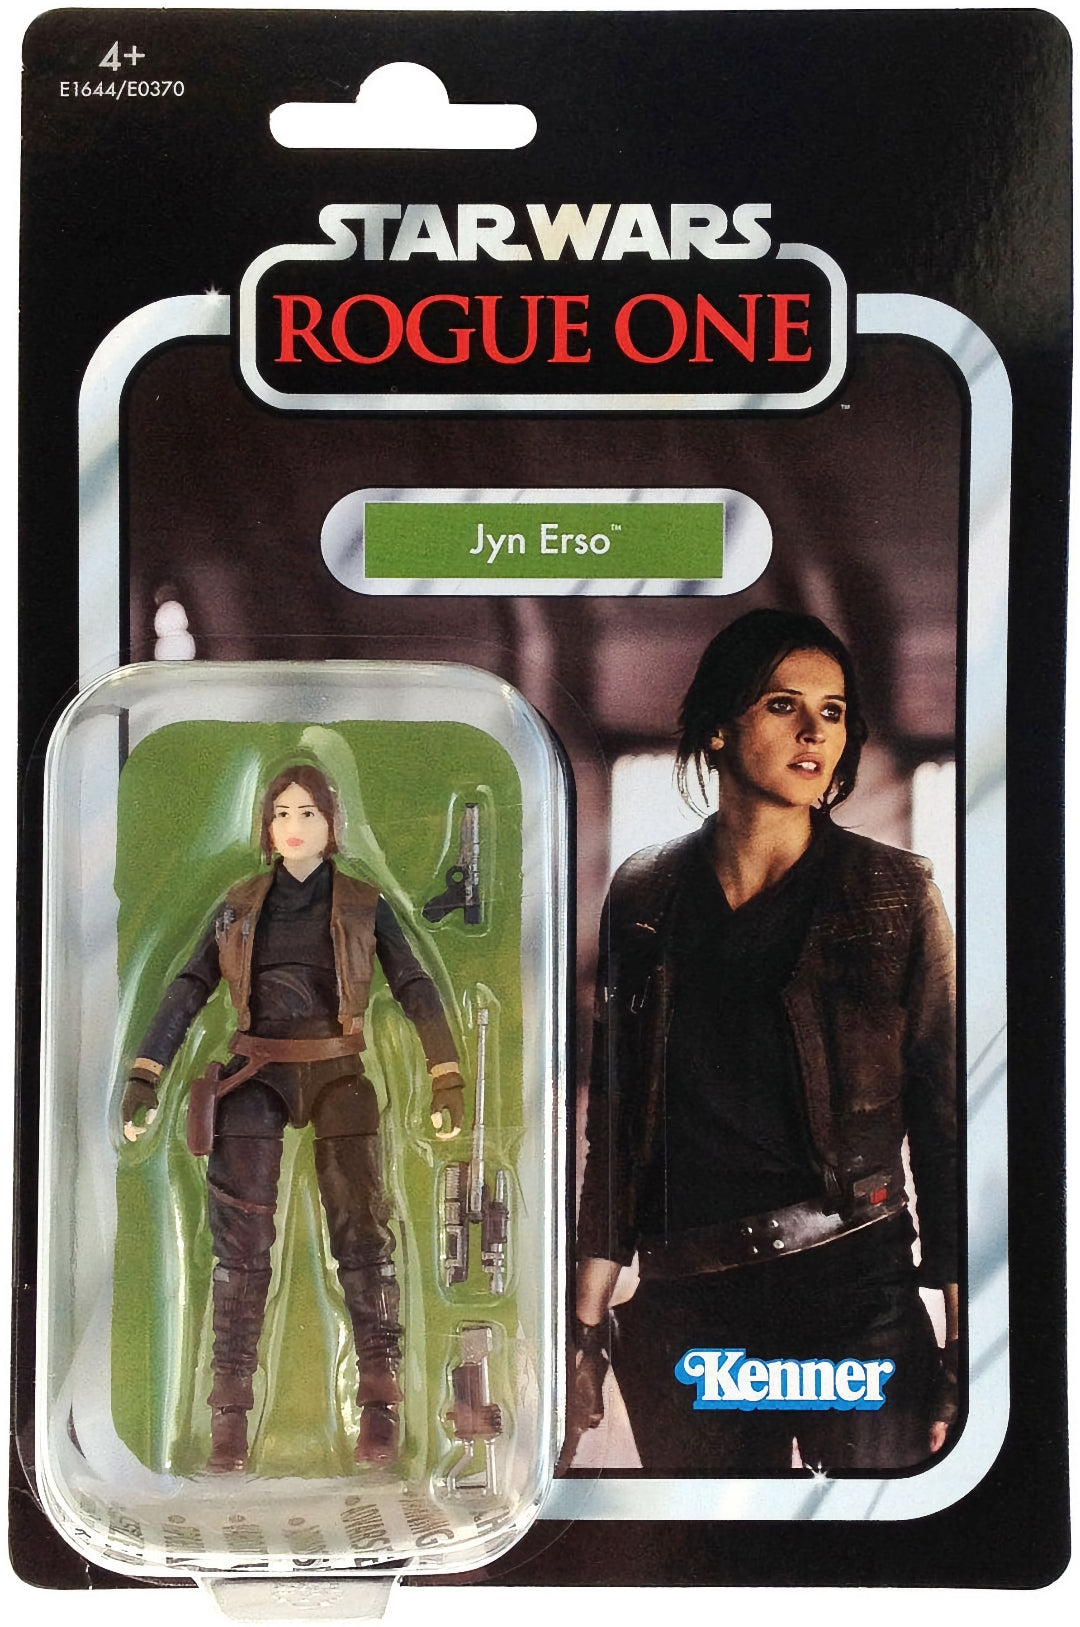 Hasbro - Star Wars VC119 - Rogue One - Jyn Erso (Wave 1 April 2018)